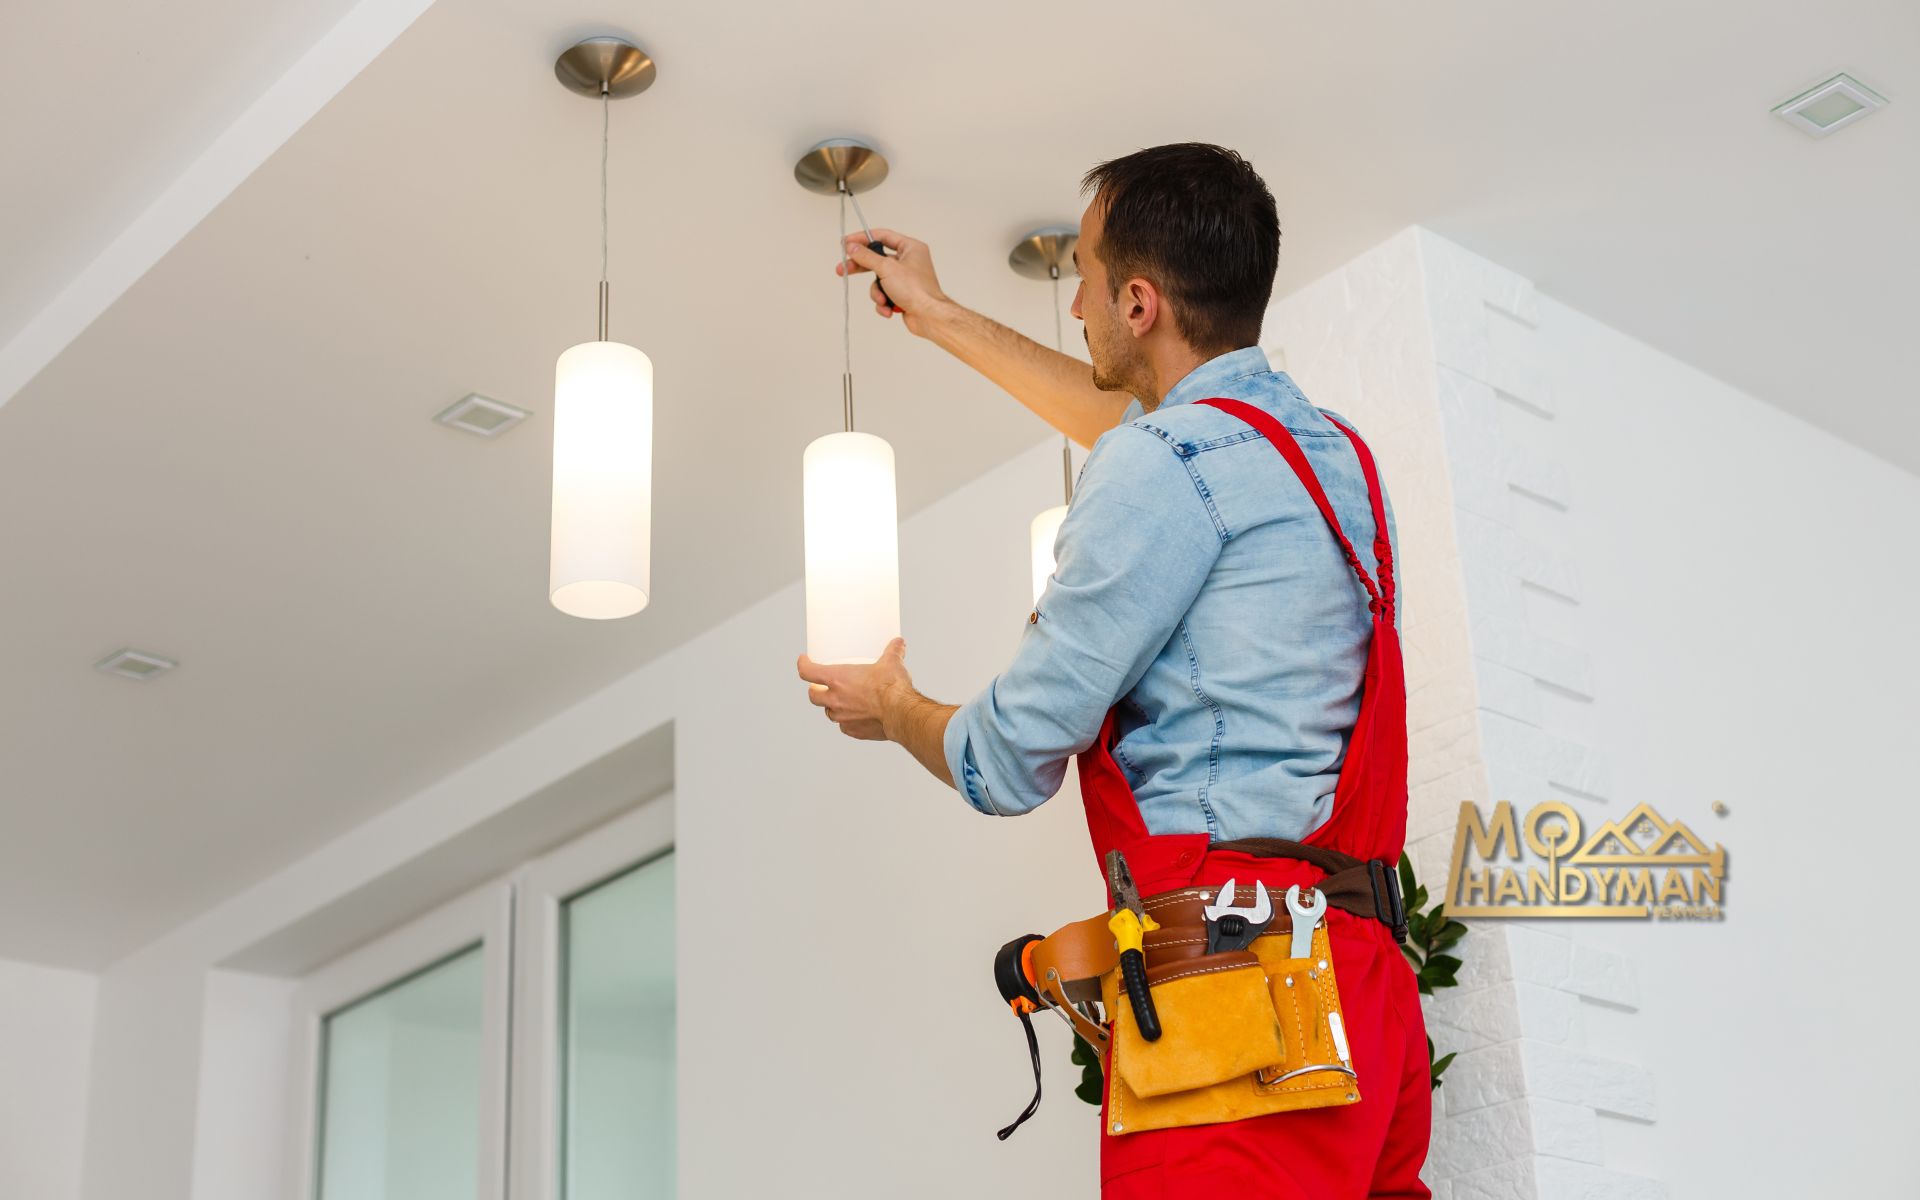 Licensed electricians performing home electrical safety inspections to ensure your living space is powered safely and efficiently, avoiding hazards.